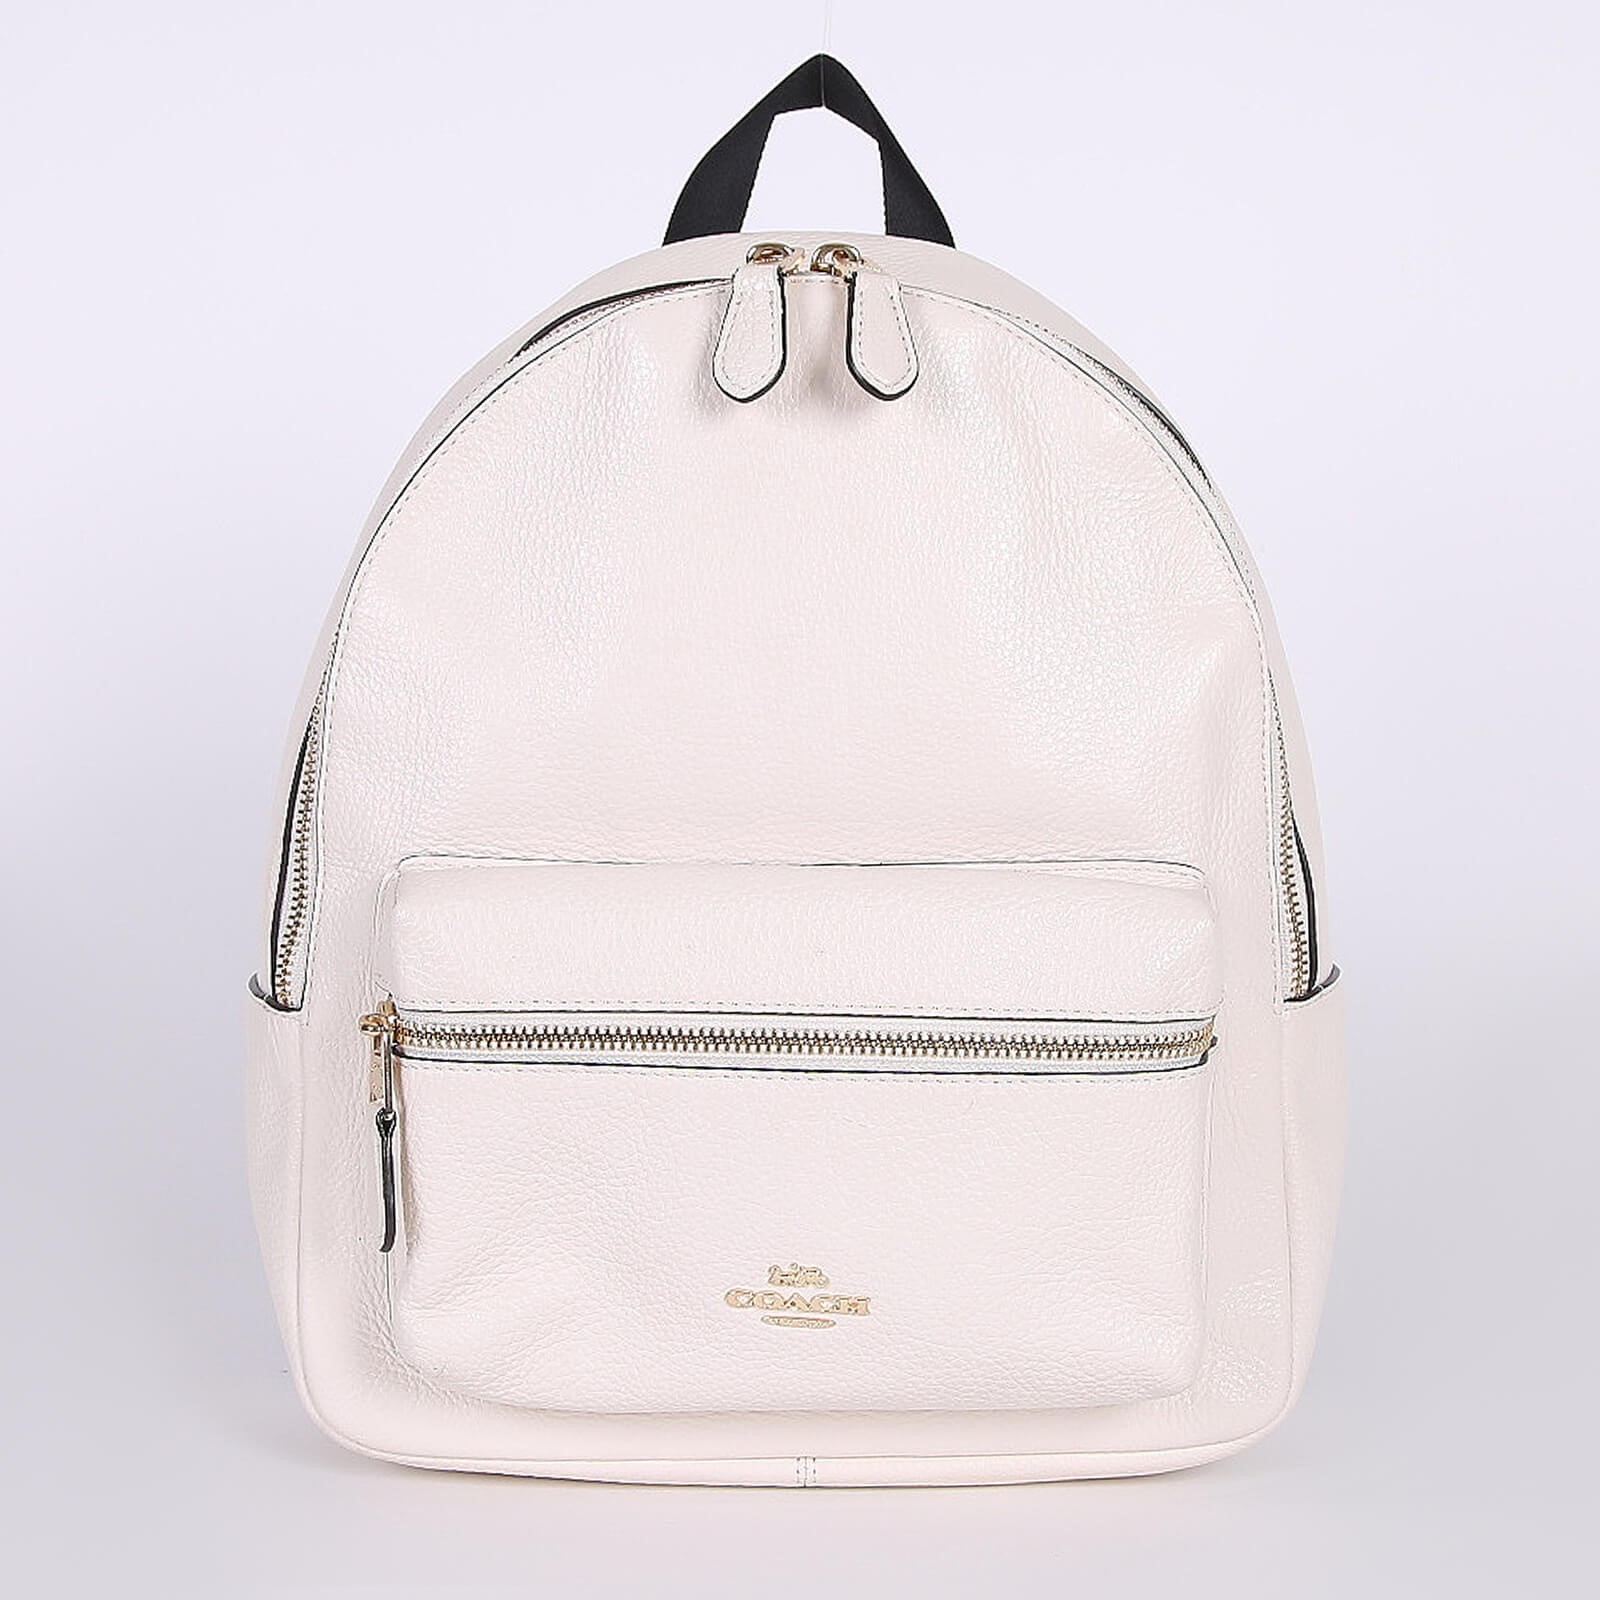 Backpack Designer By Coach Size: Small